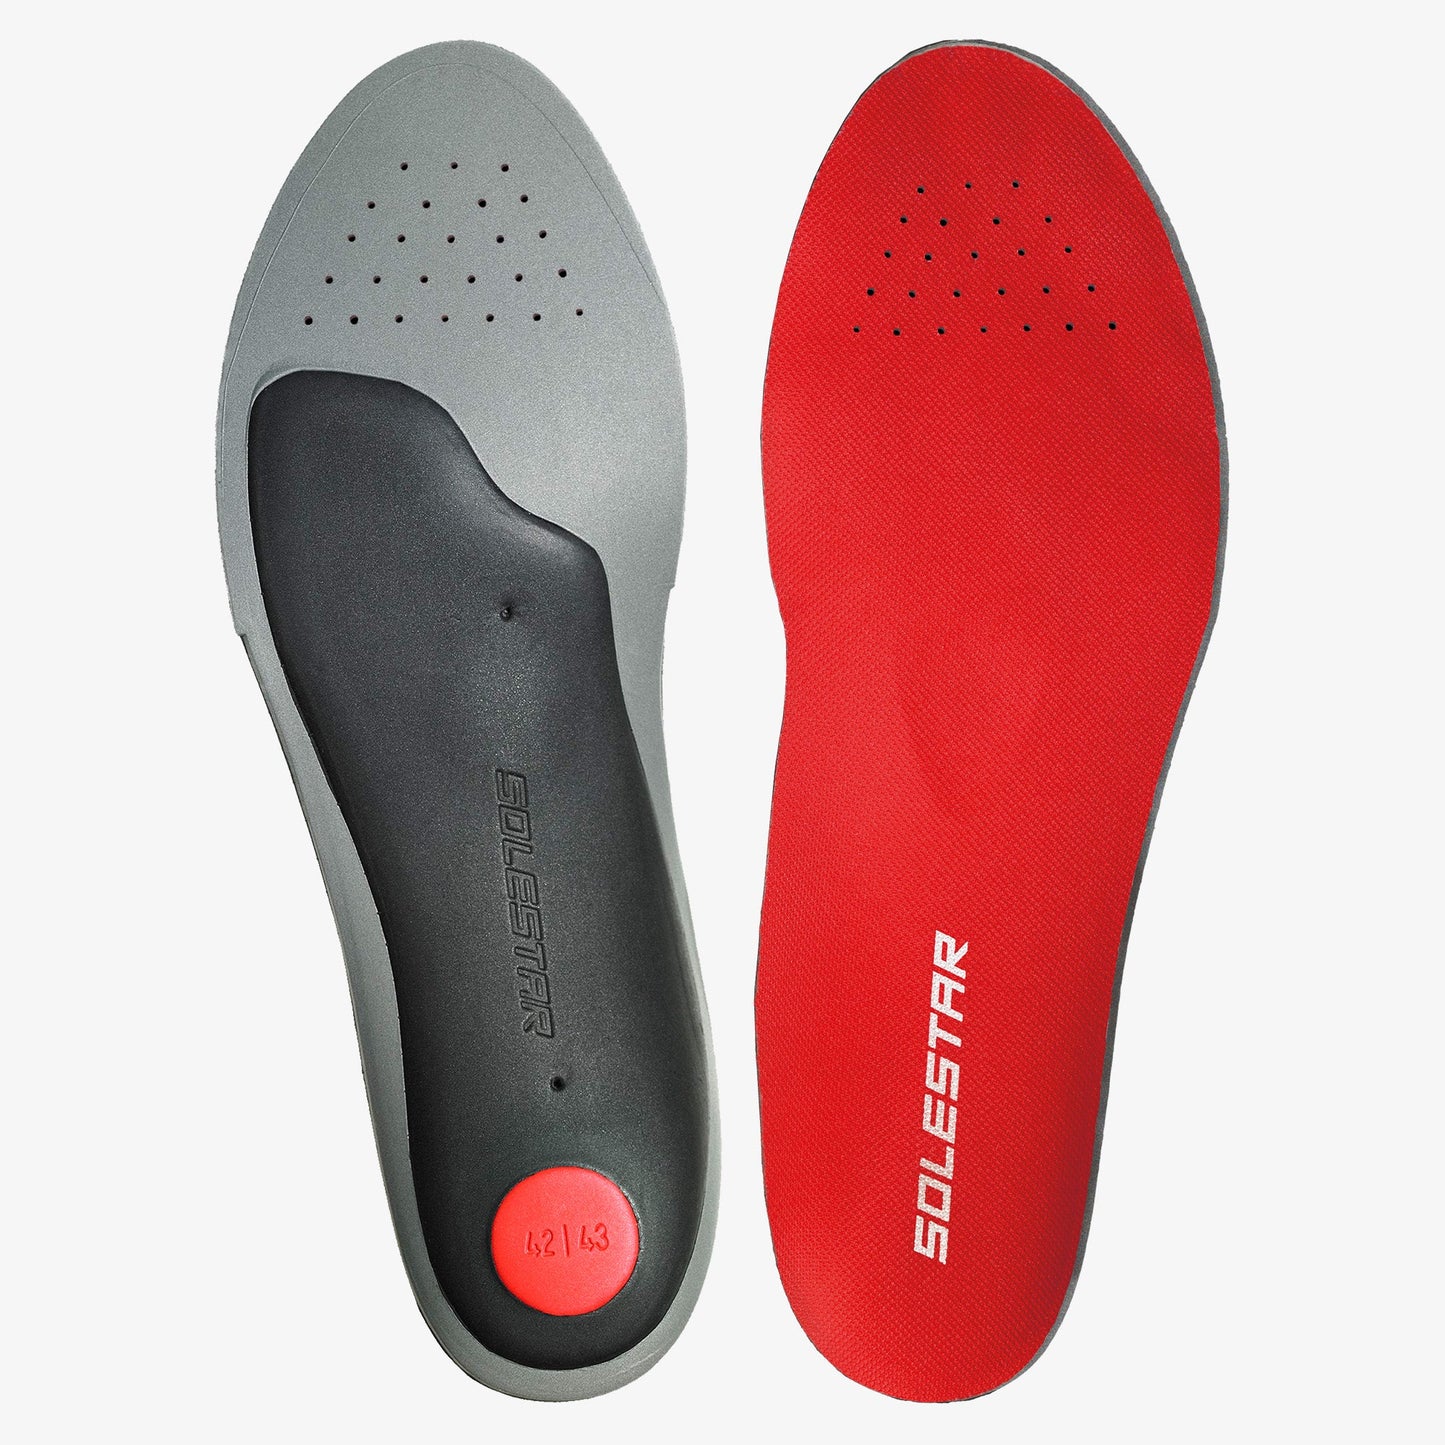 SOLESTAR NEUTRAL RUN: Running Insoles For Increased Stability